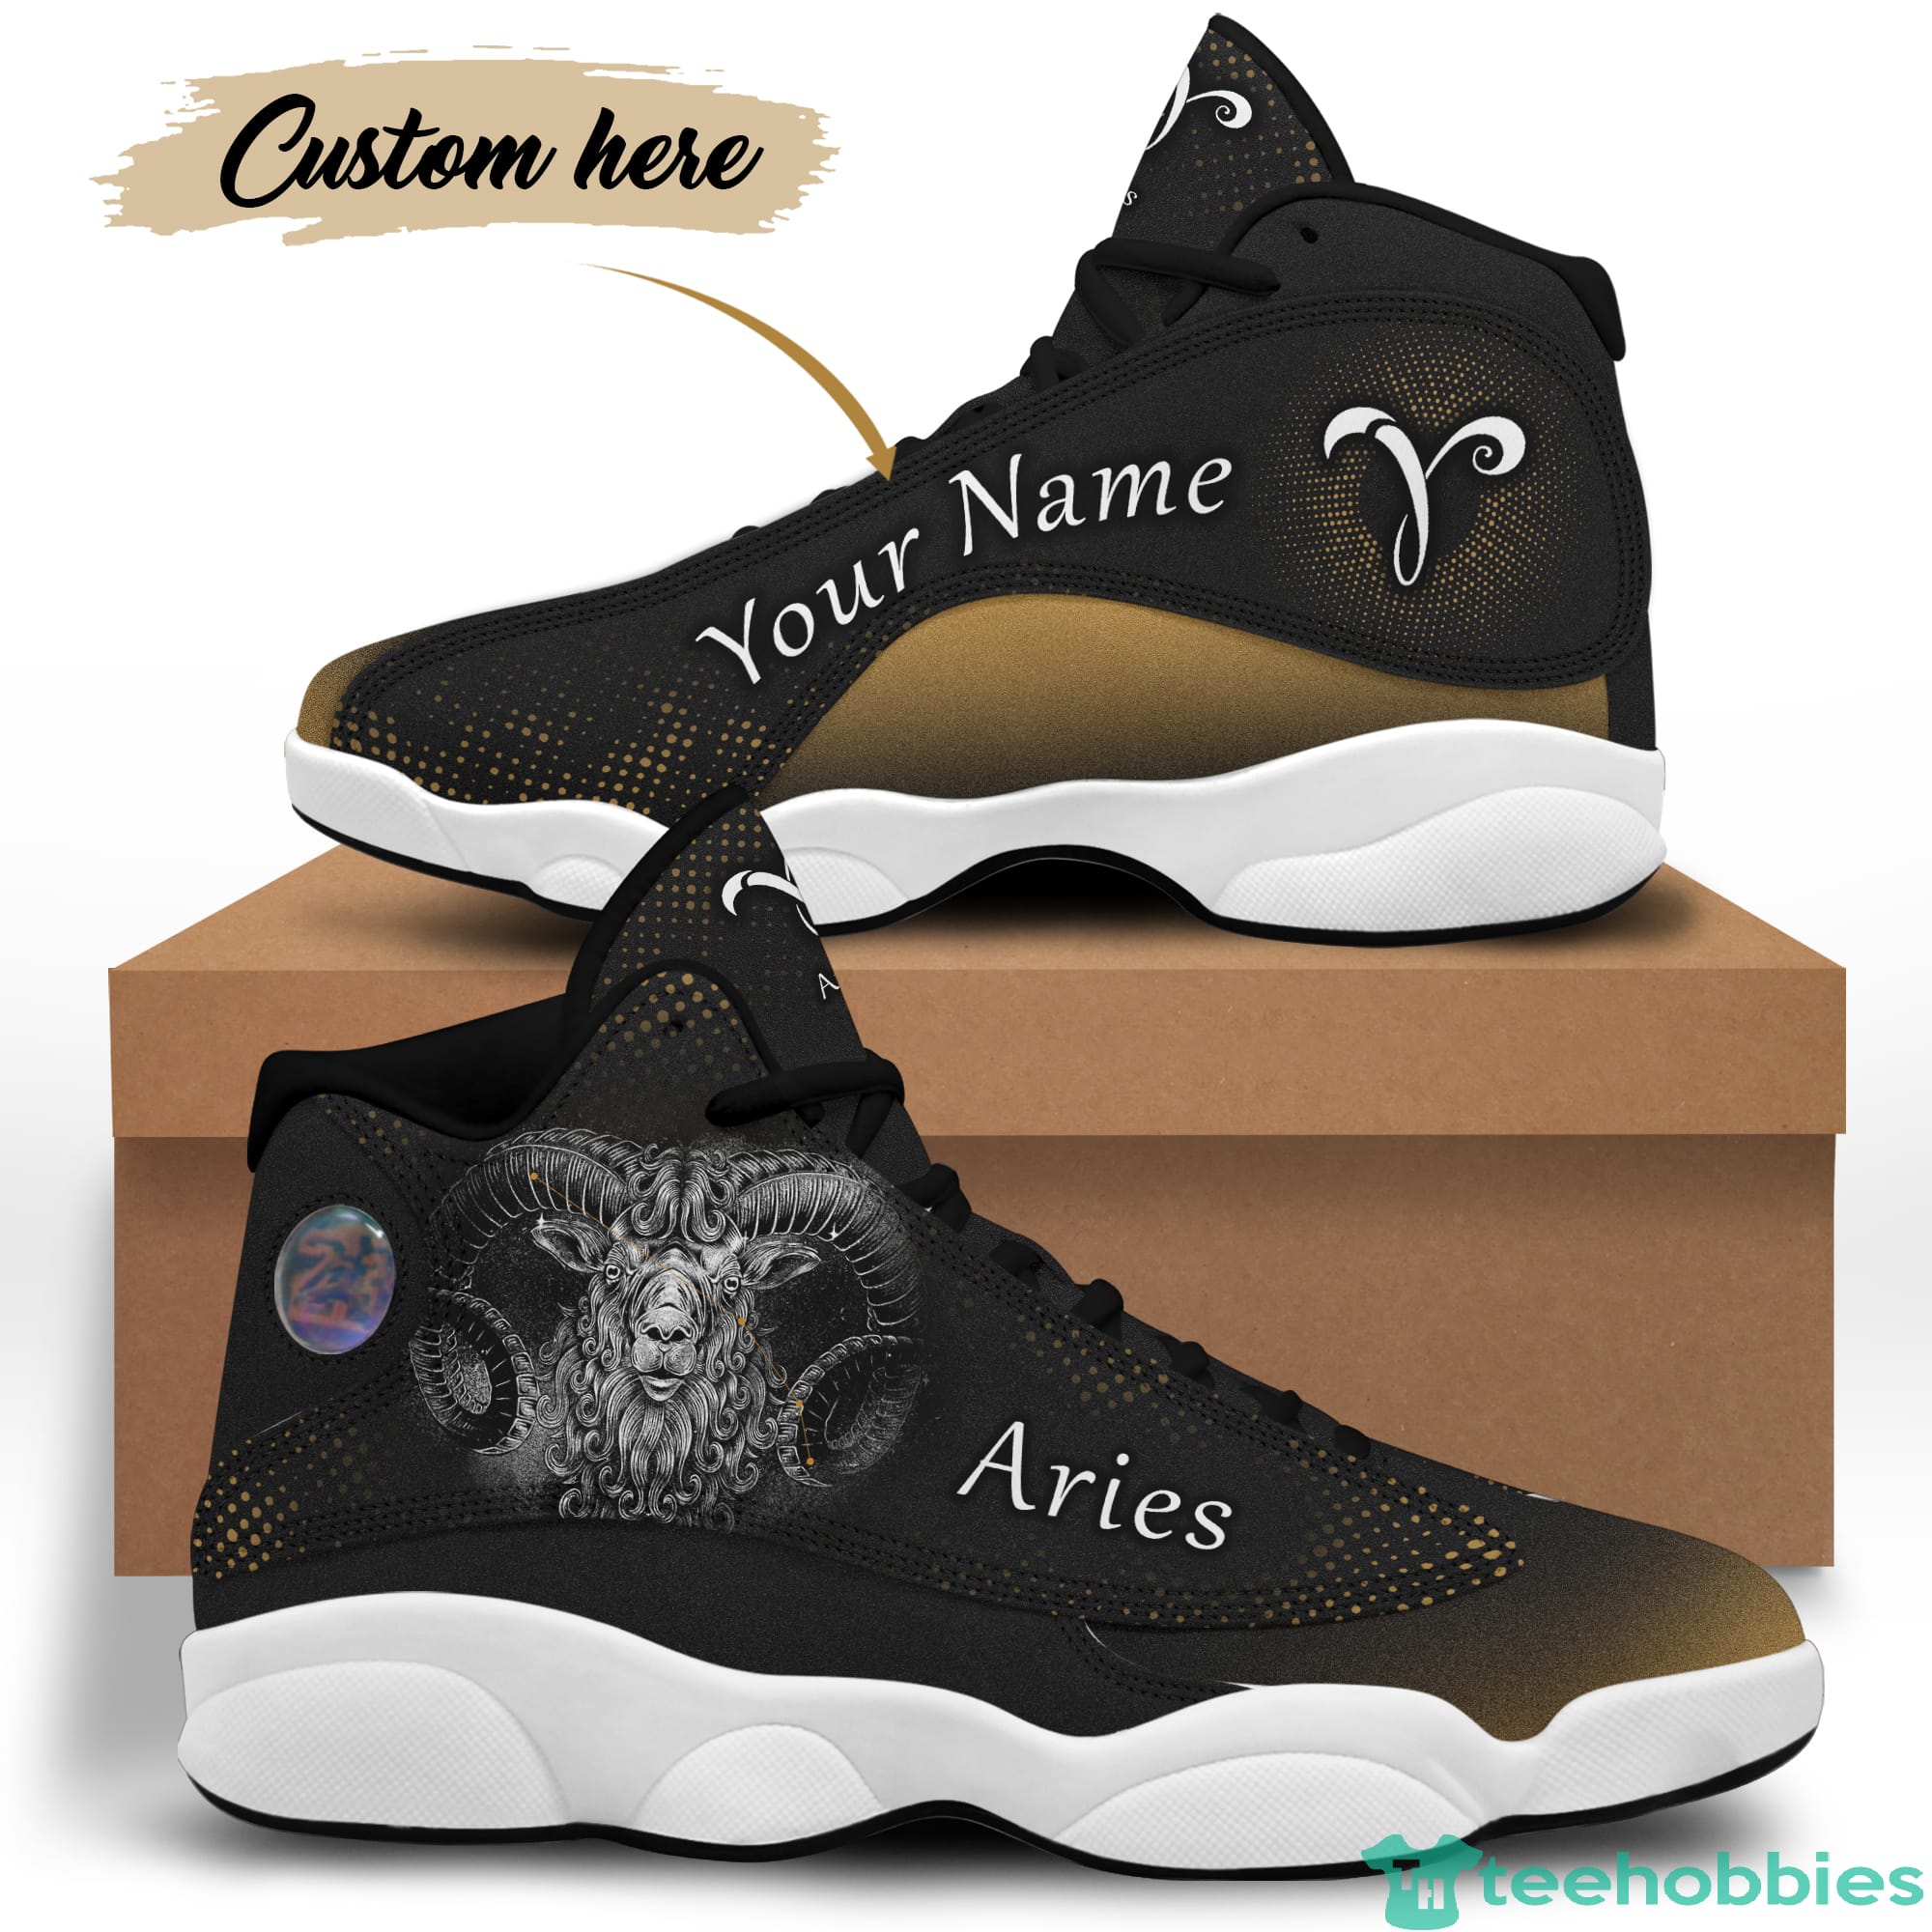 Aries Birthday Gift Personalized Name Personalized Name Air Jordan 13 Shoes SKU-276